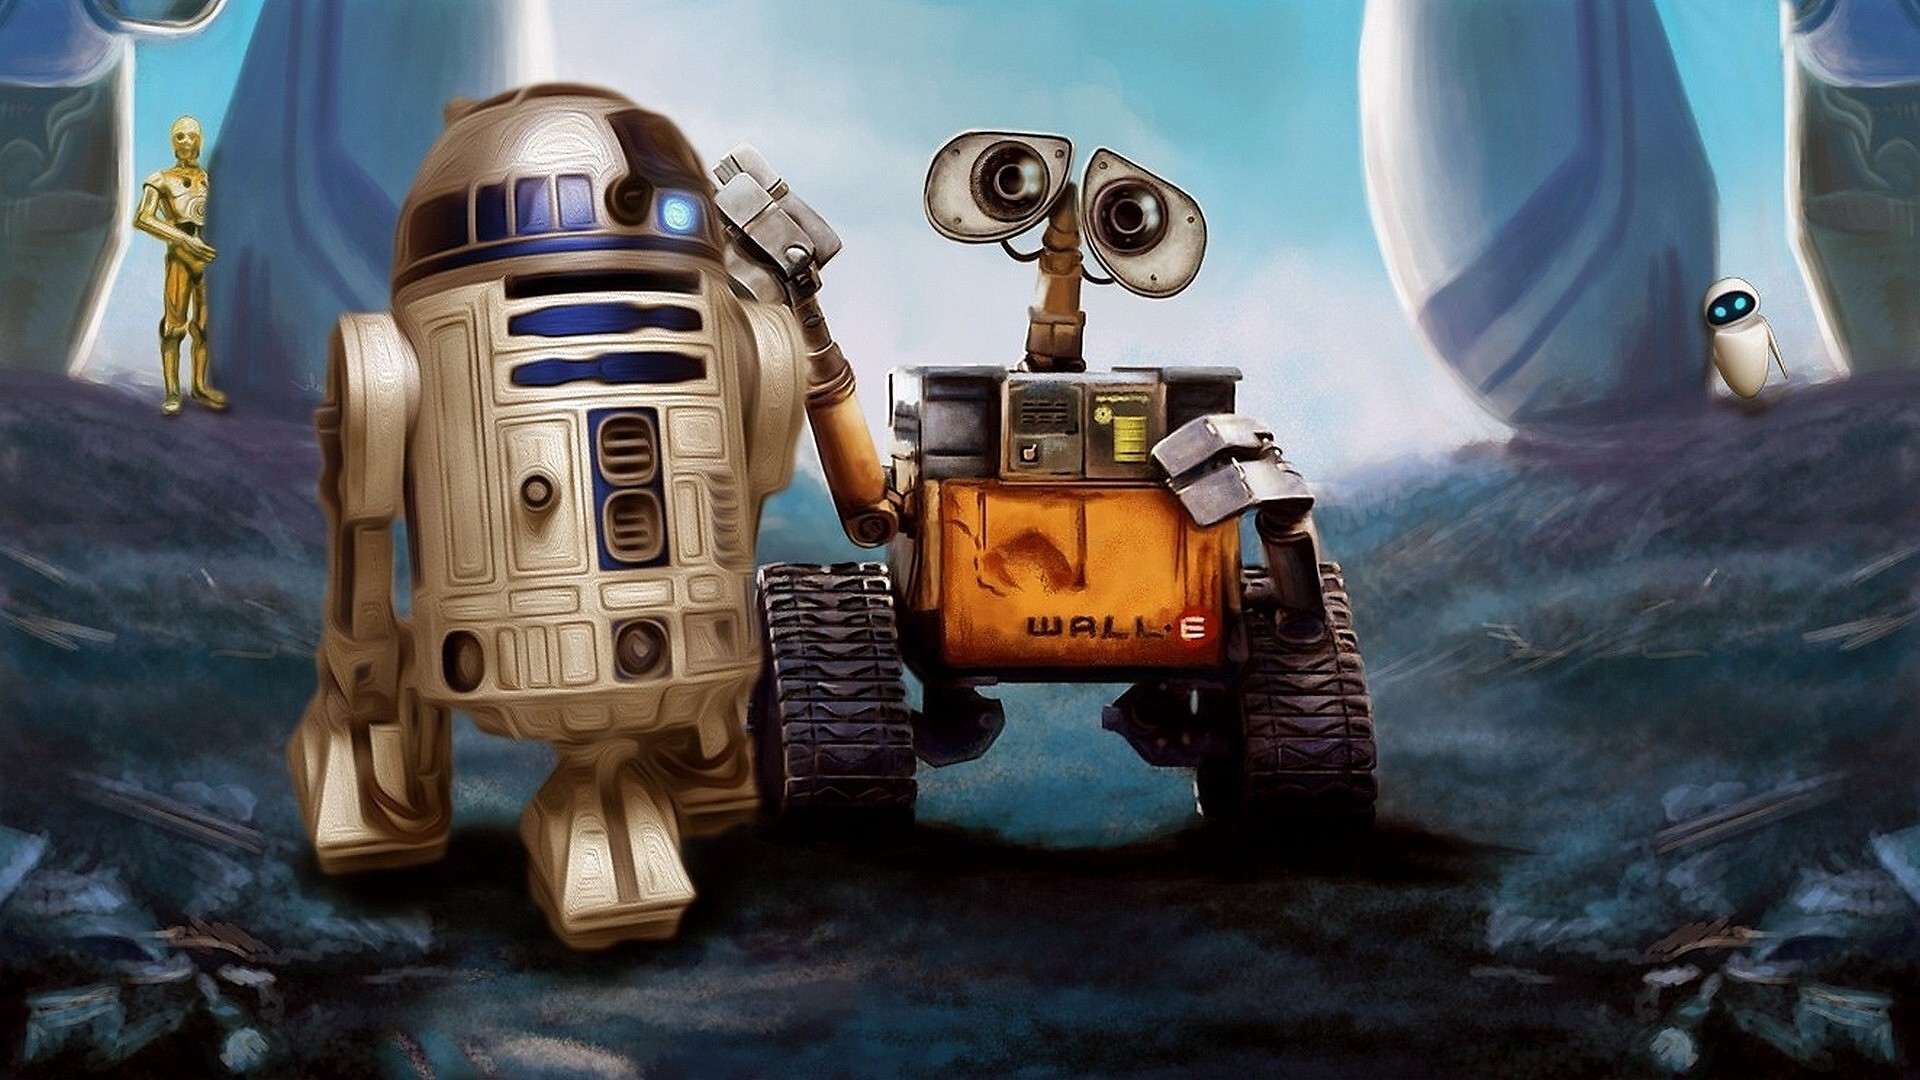 WALLE, Pixar Animation Studios, Star Wars, Robot, Movies, R2 D2, Crossover Wallpapers HD / Desktop and Mobile Backgrounds